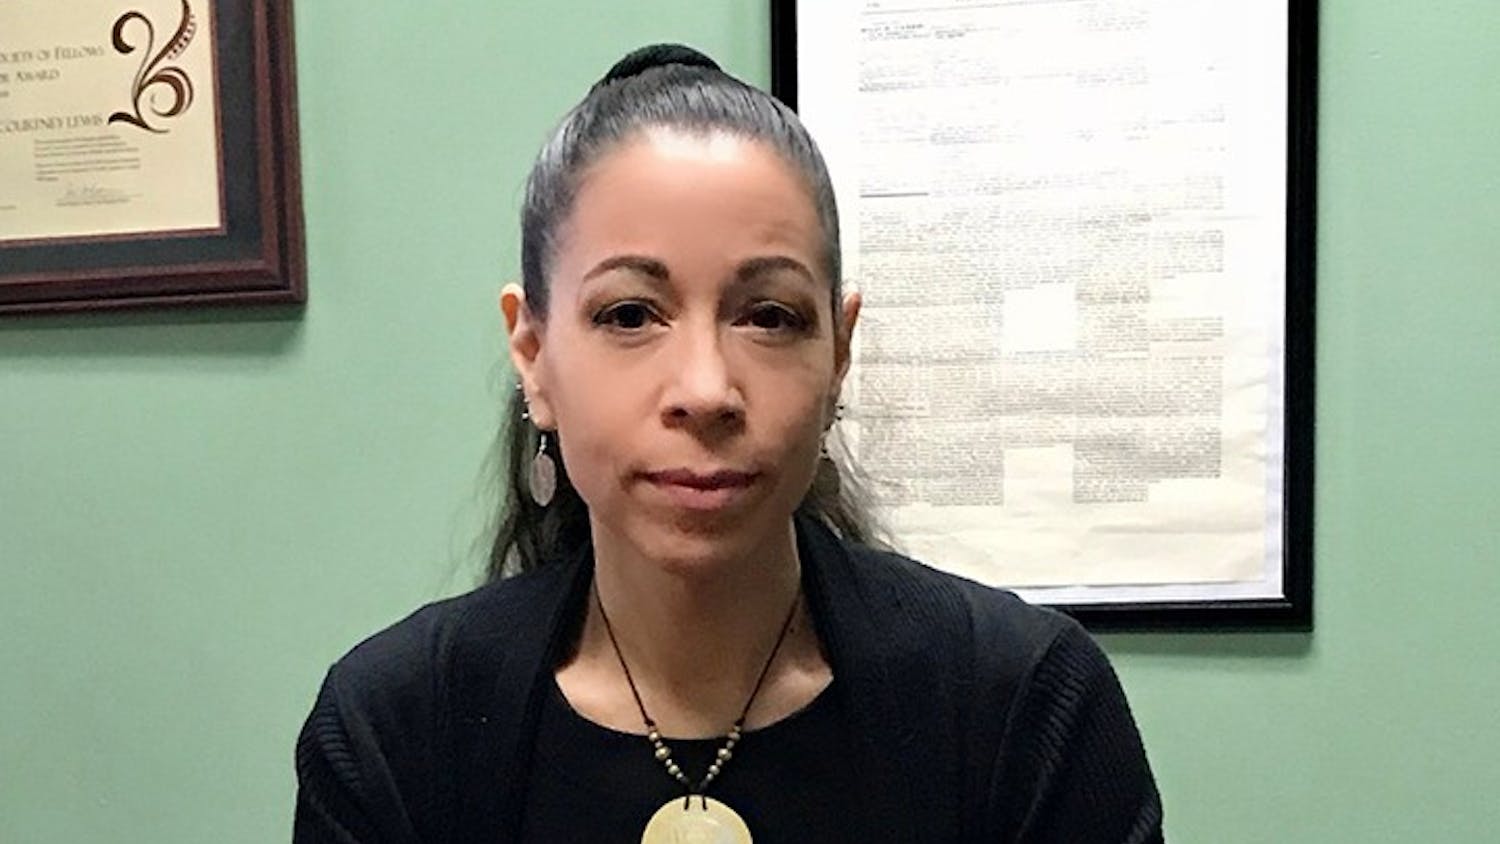 Associate professor and Cherokee Nation citizen Courtney Lewis advocates for American Indian rights on USC’s campus. Lewis focuses her research on American Indian small business owners.